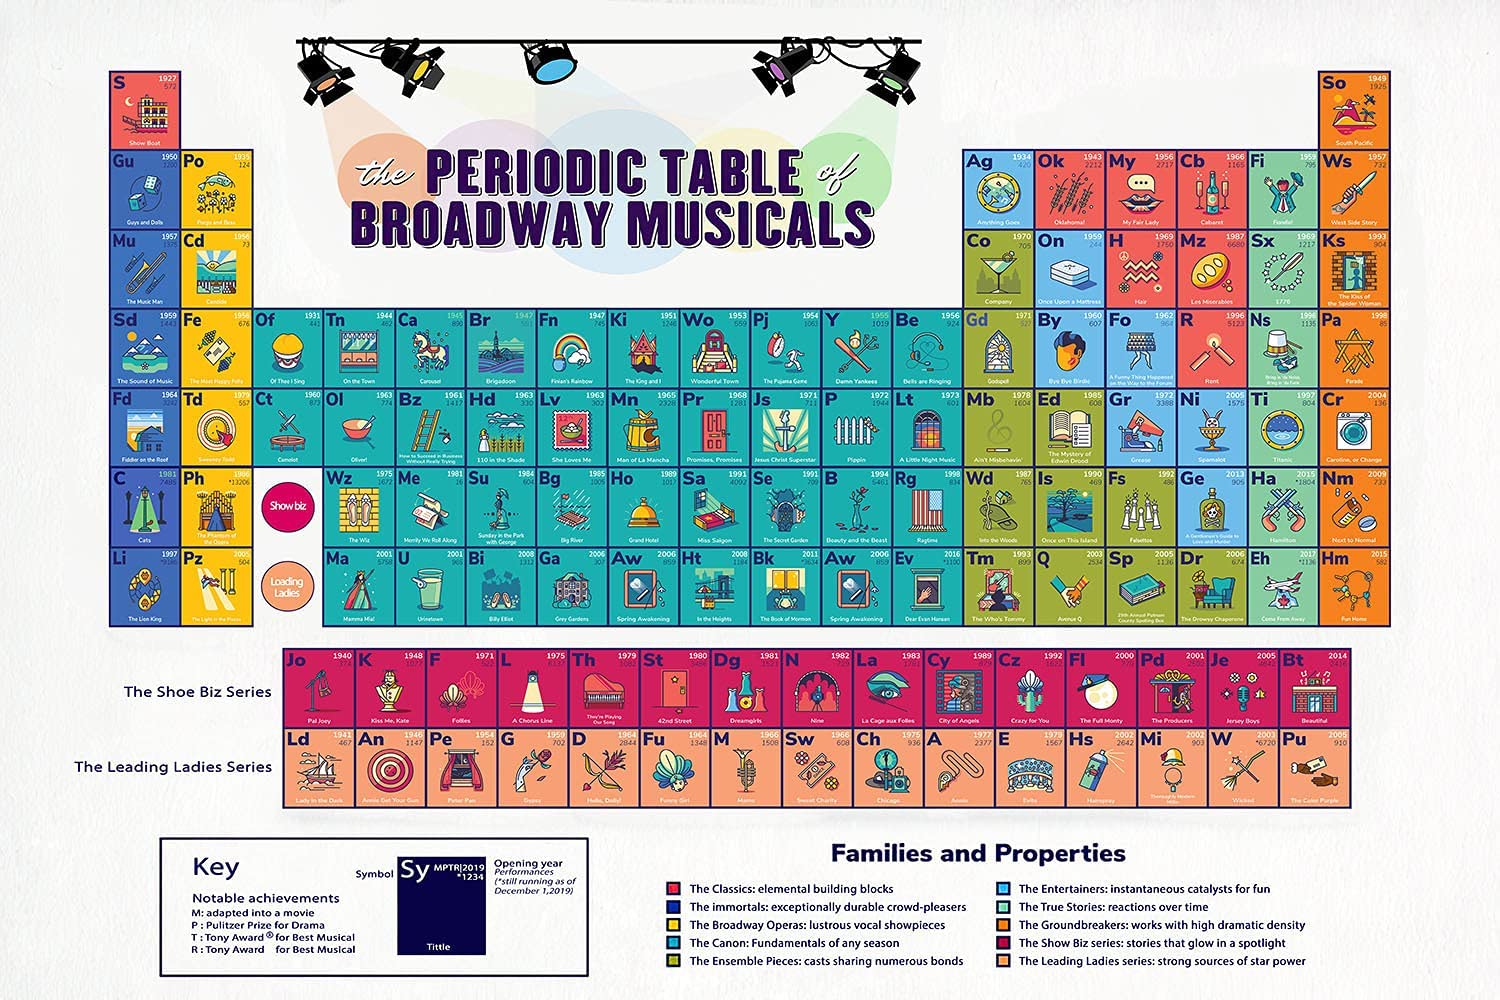 Skitongifts Poster No Frame, Wall Art, Home Decor Musical The Periodic Table Of Broadway Musicals GP2810